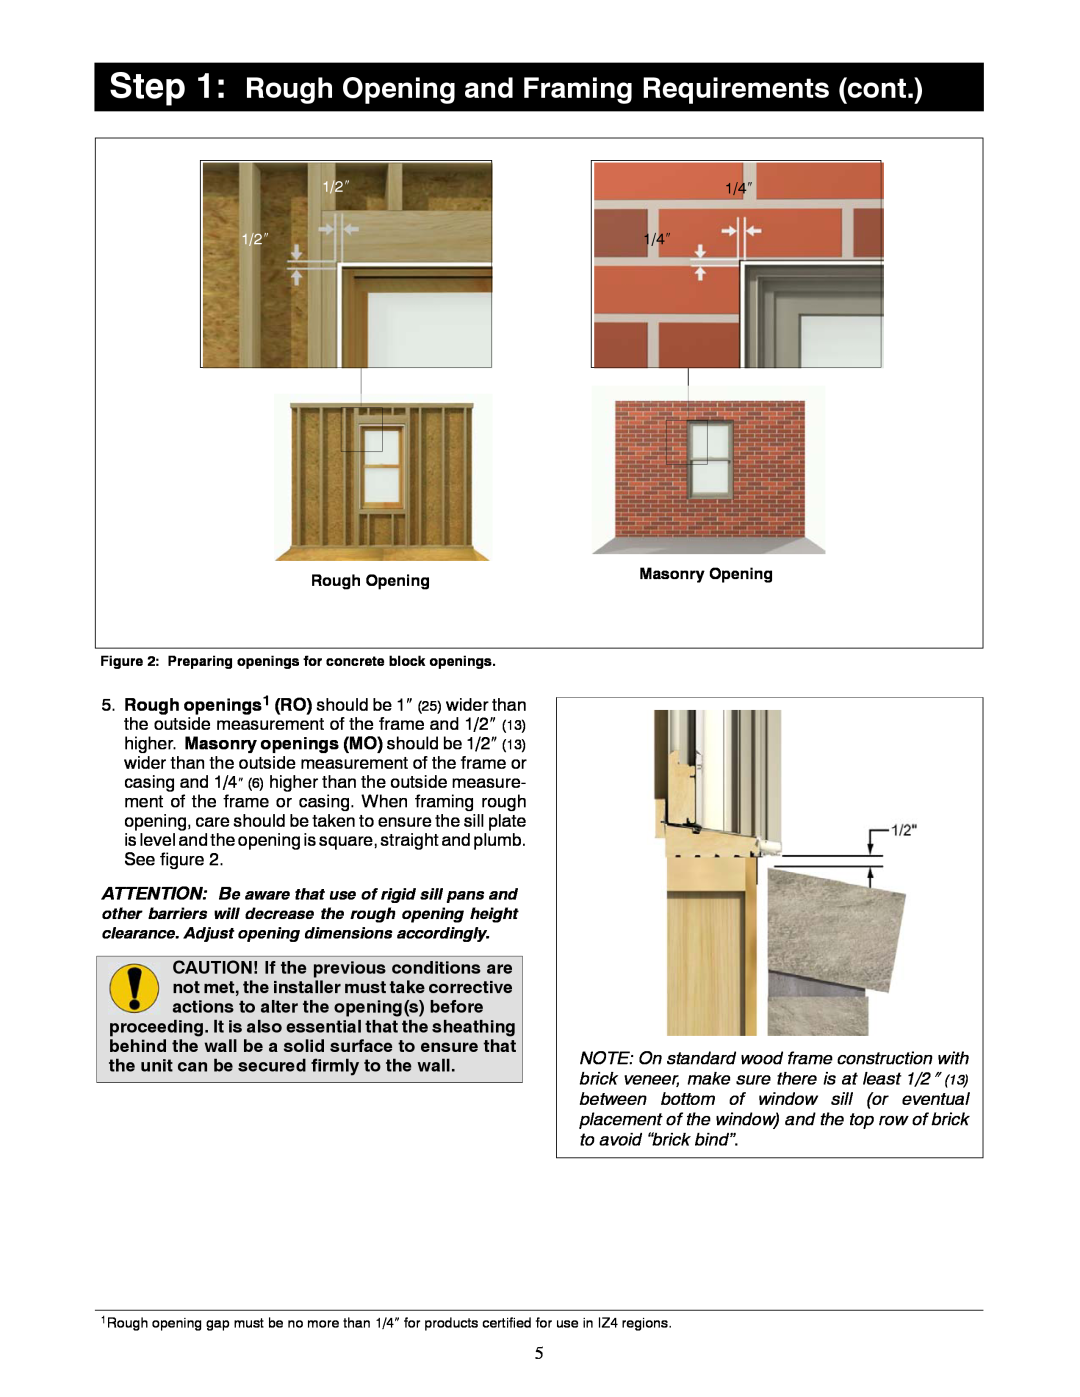 Marvin Window manual Rough Opening and Framing Requirements cont, Masonry Opening 